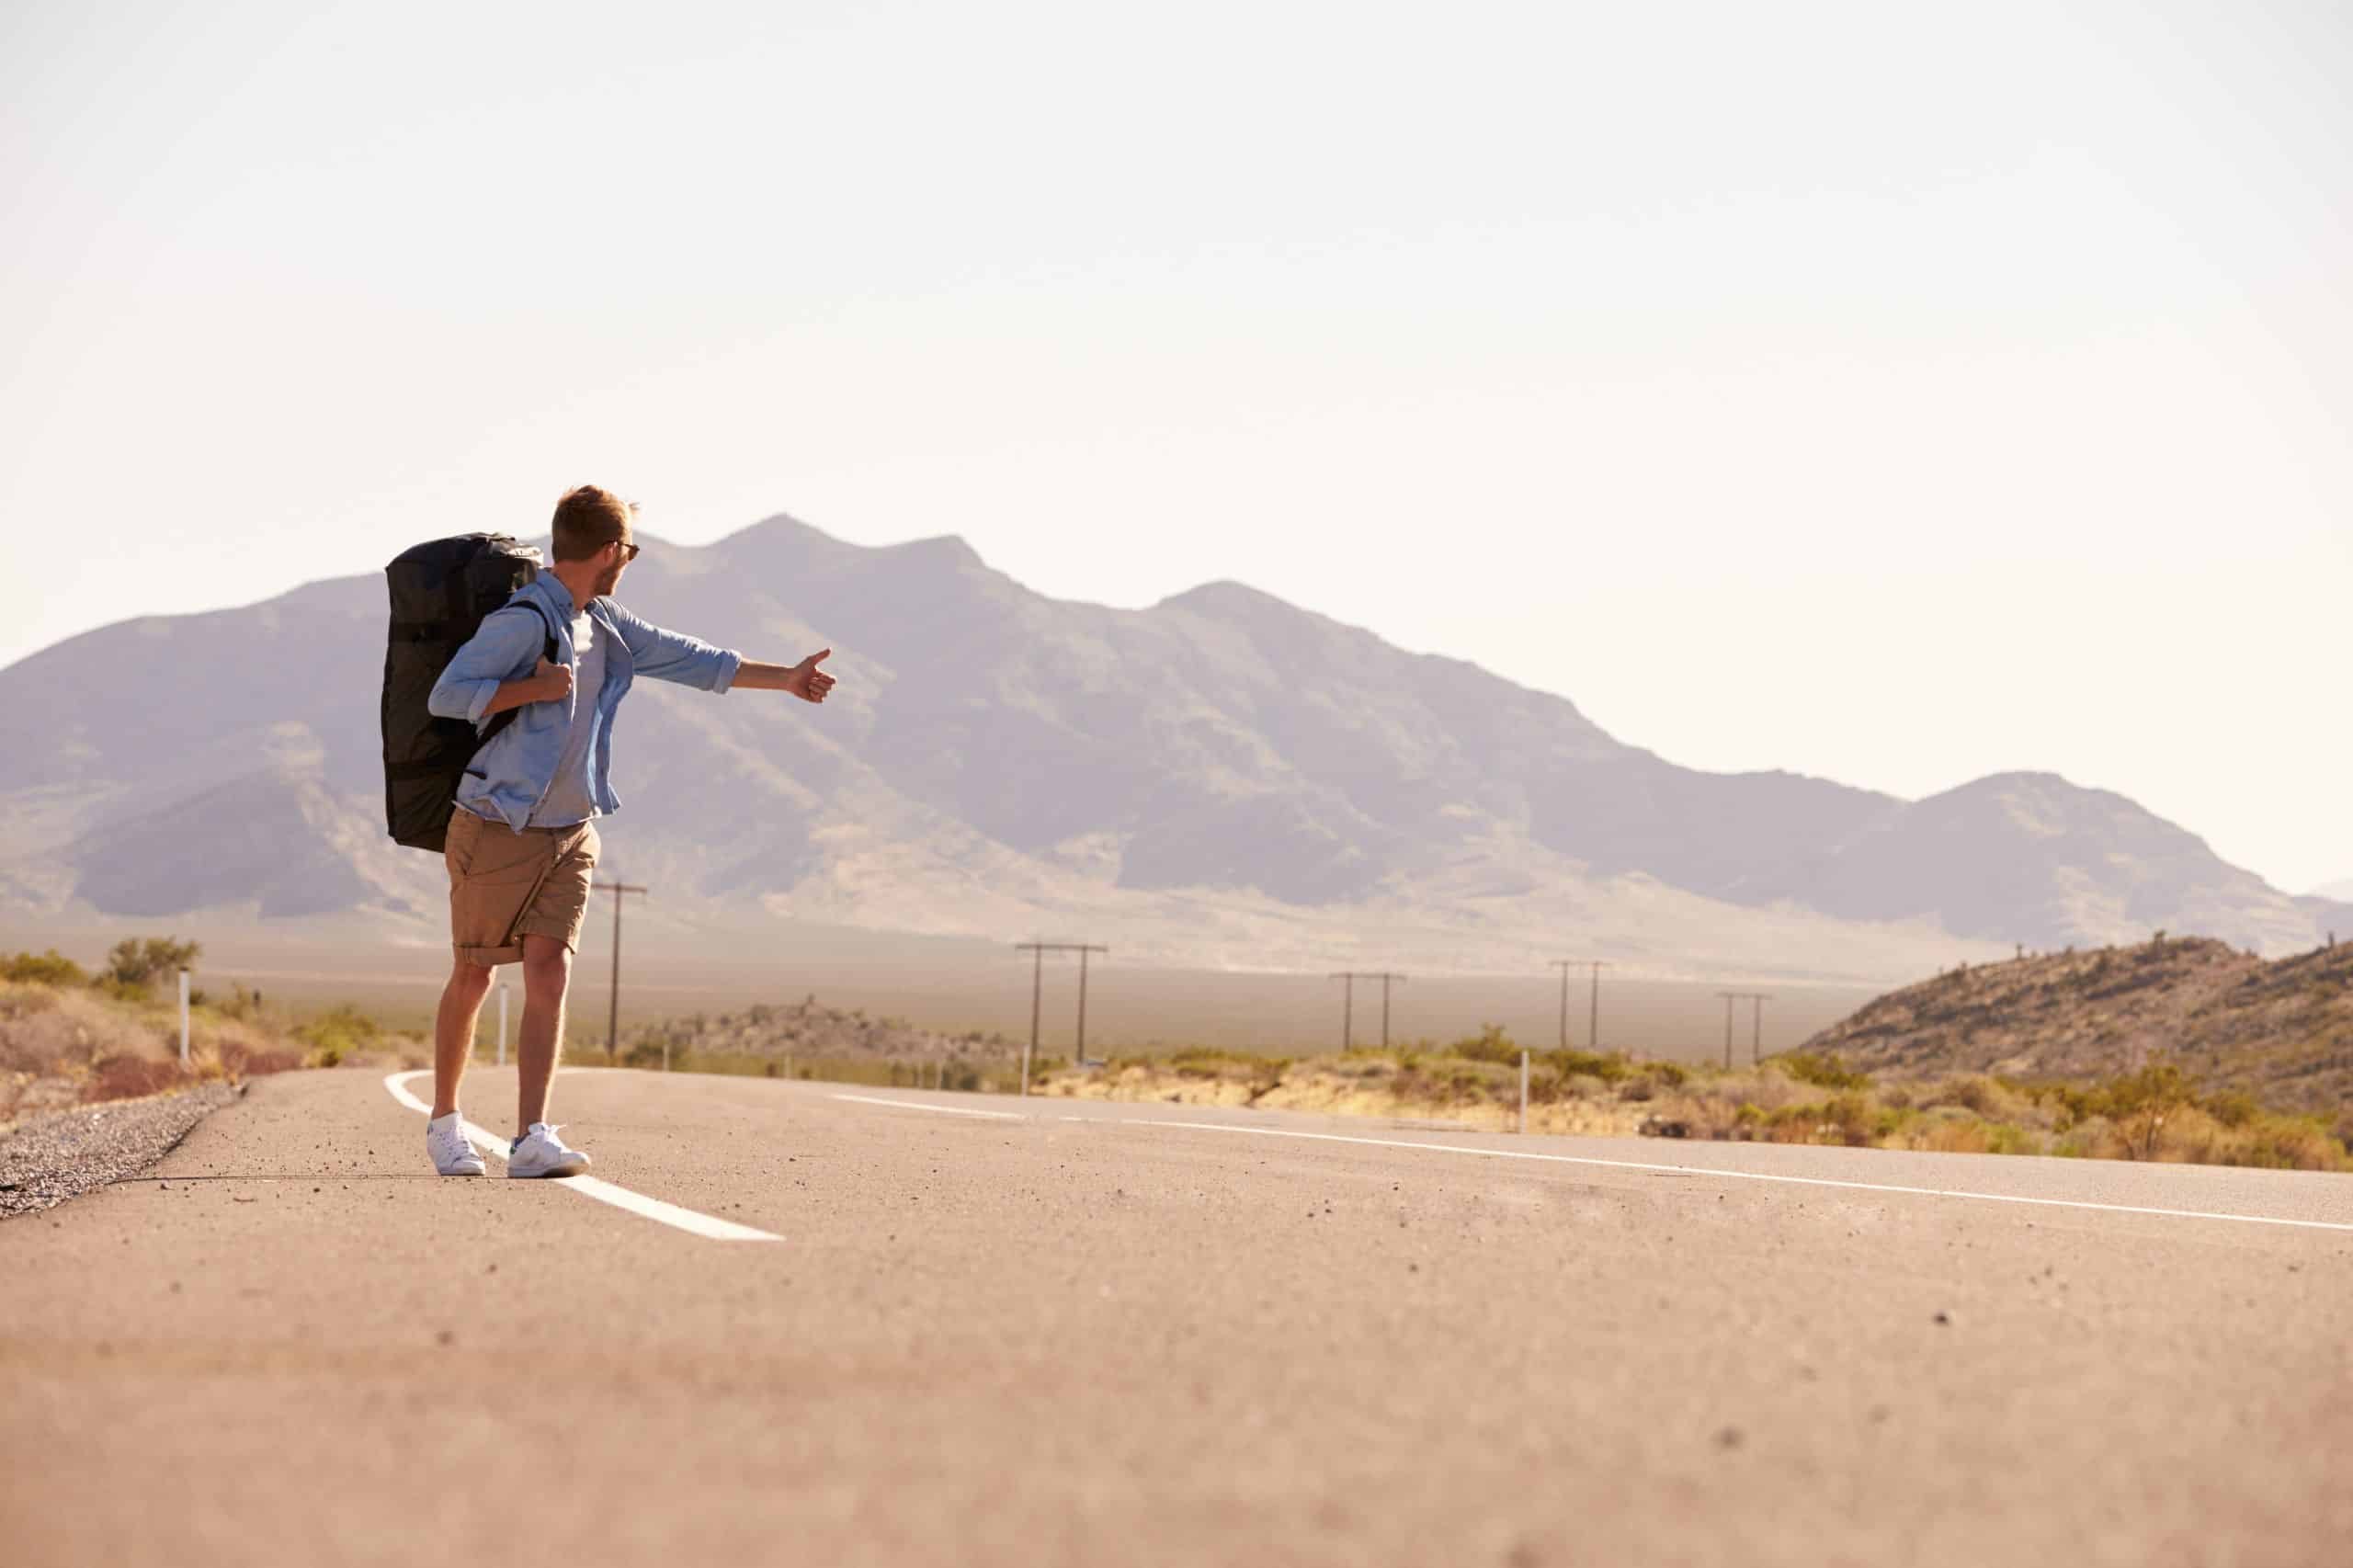 Работа в дали от людей. Hitchhiking is the best way to see the World for young people эссе.